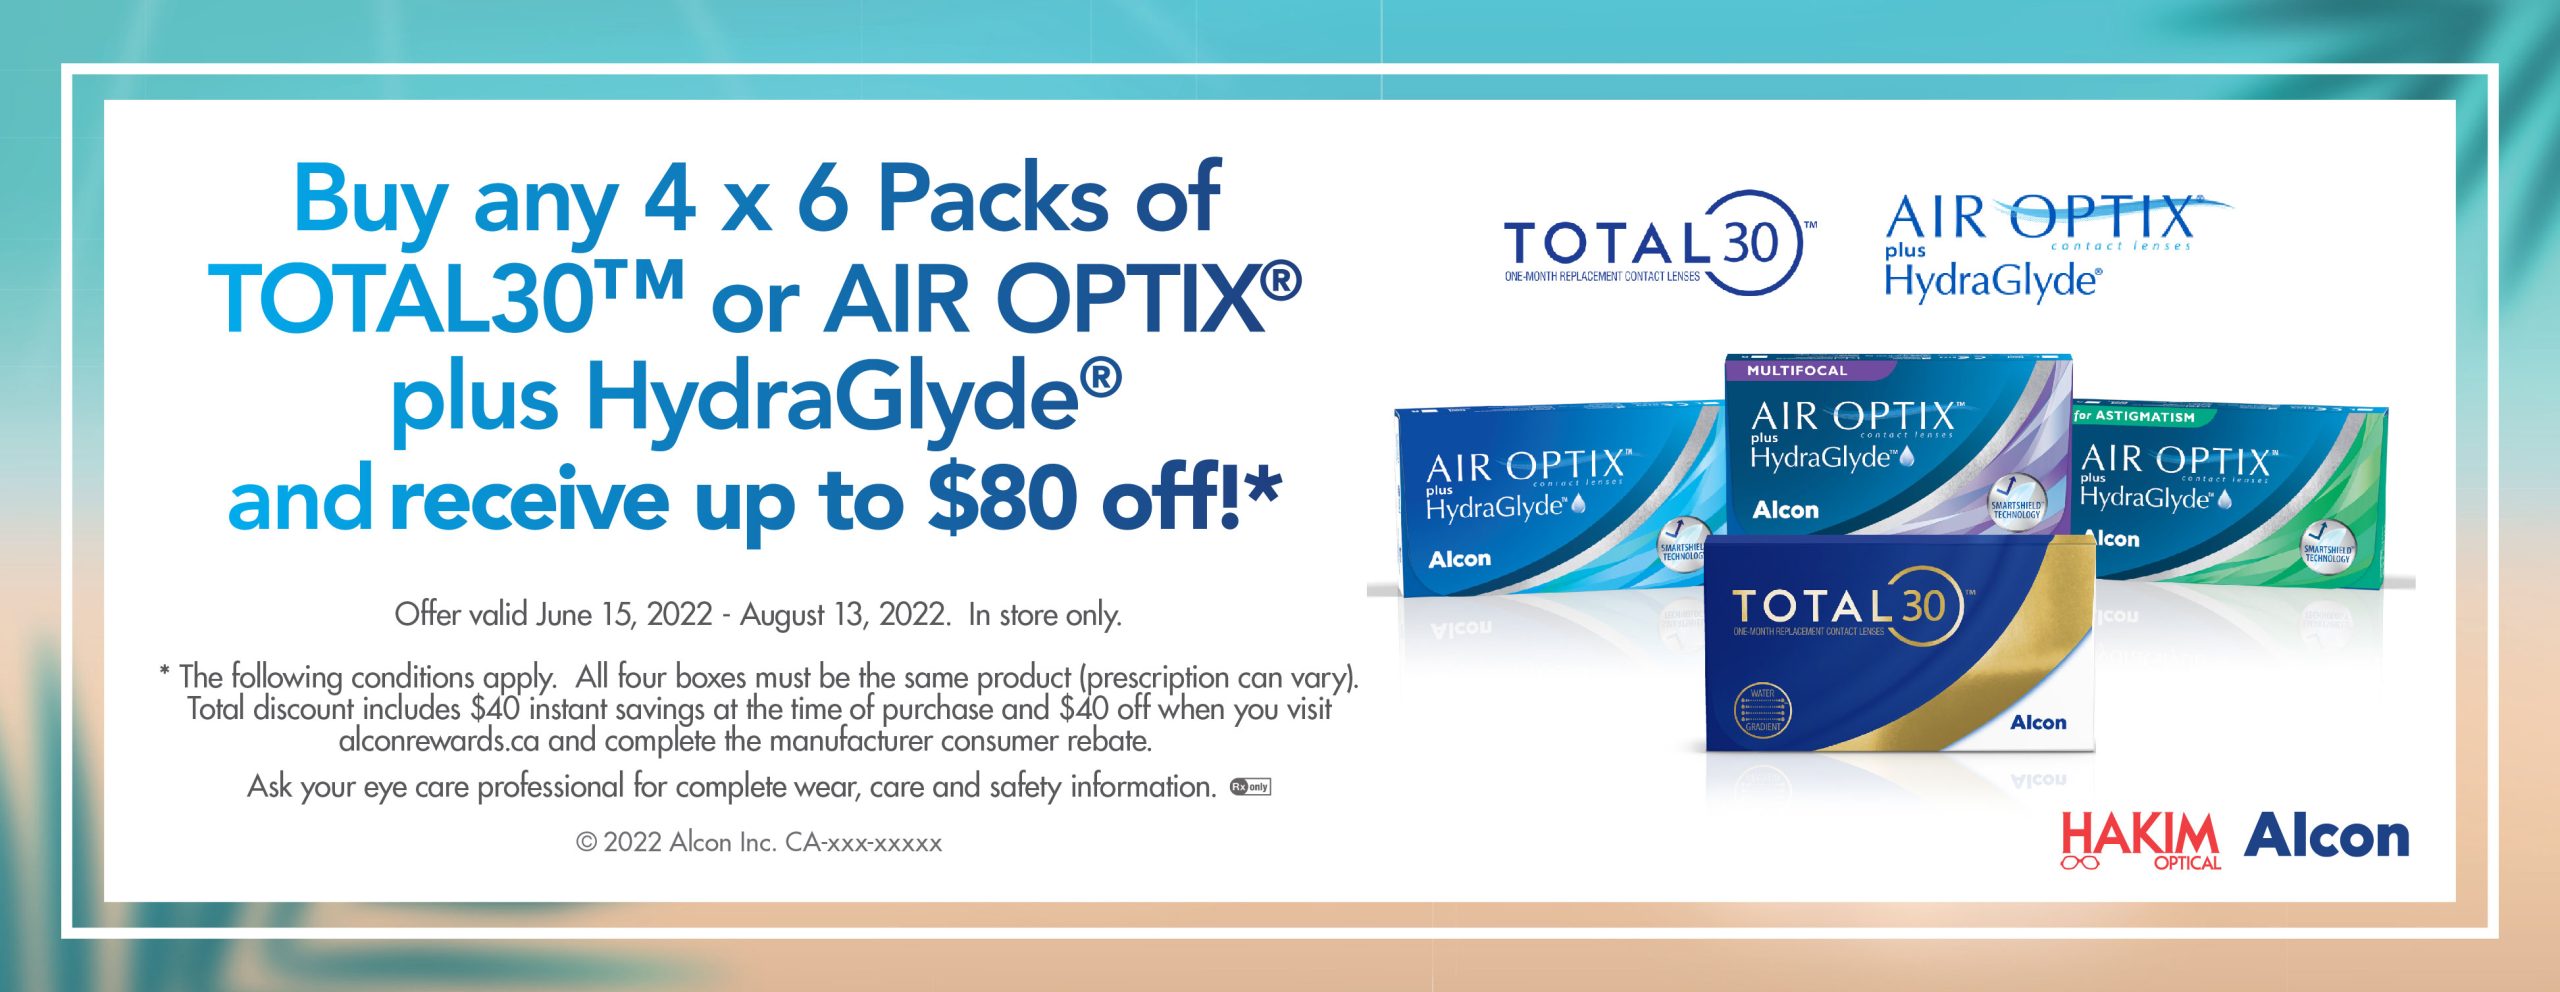 Get up to $80 off Total30 or Air Optix plus HydraGlyde contact lenses